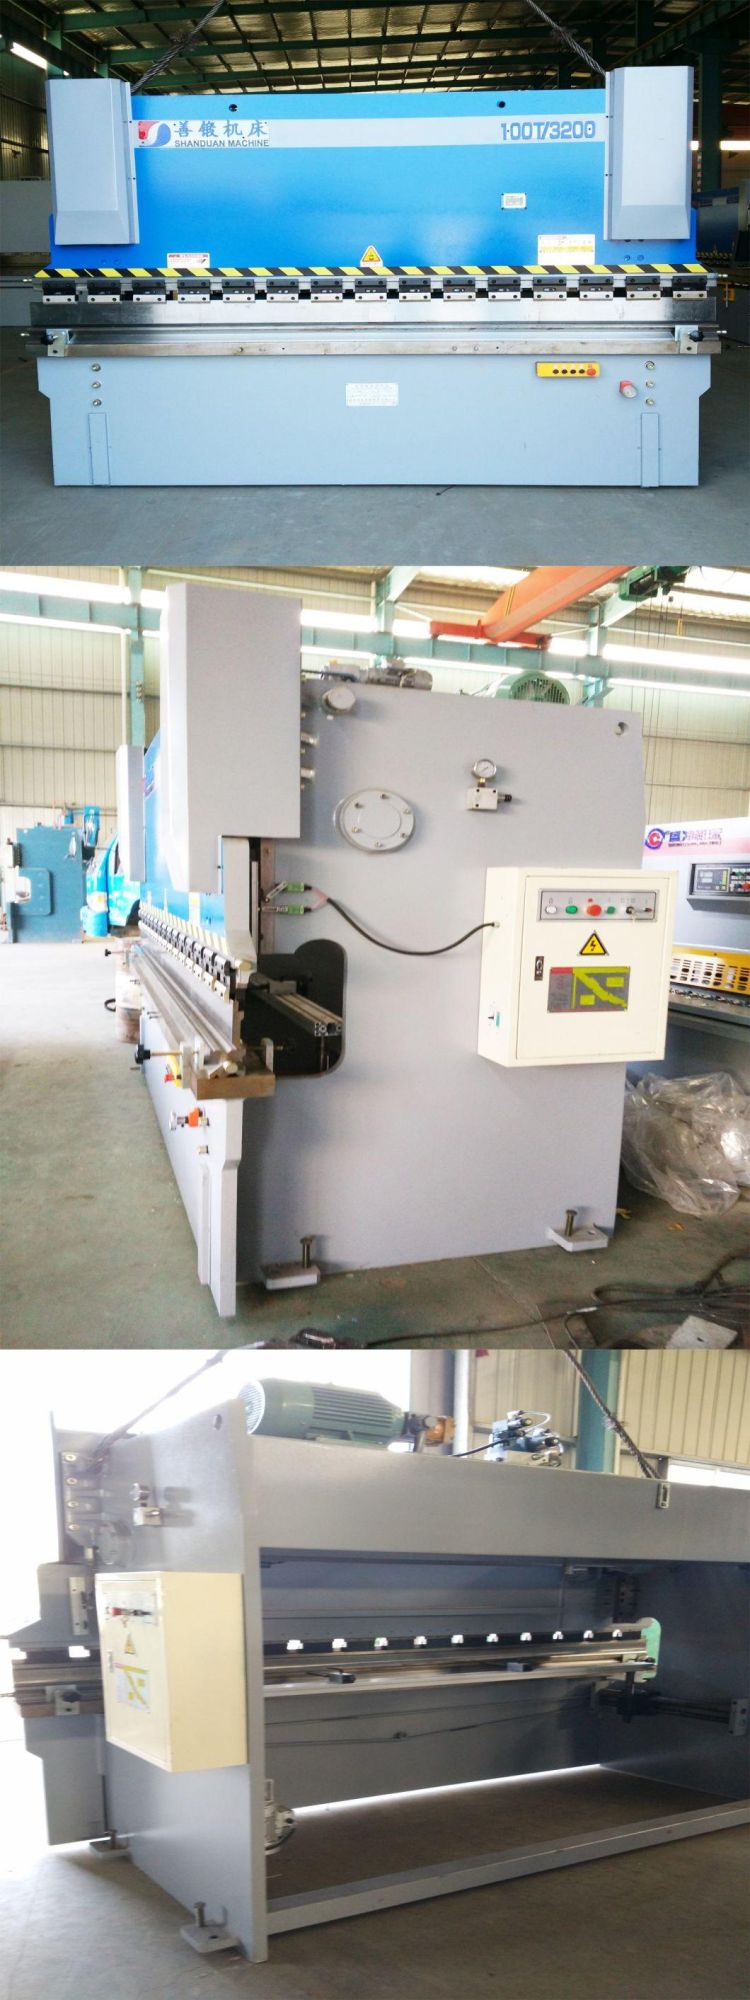 Widely Used Manual Press for Sheet Metal Bending Machine